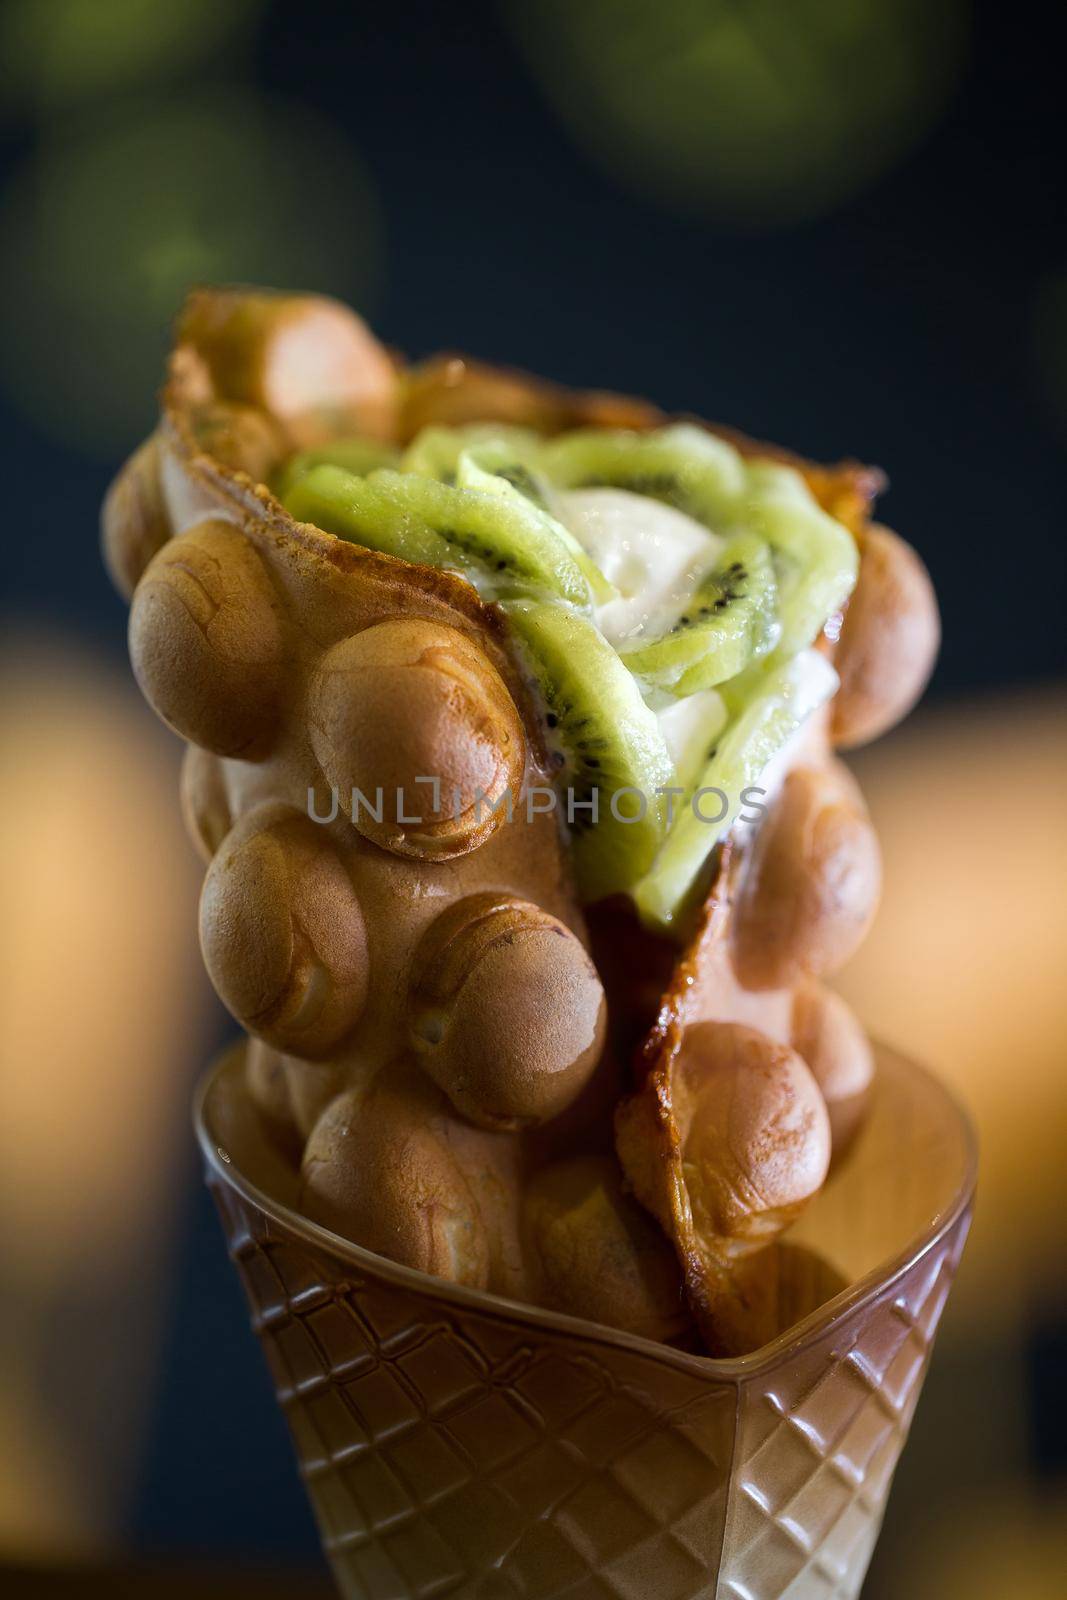 Hong Kong style egg waffle with kiwi. by StudioPeace